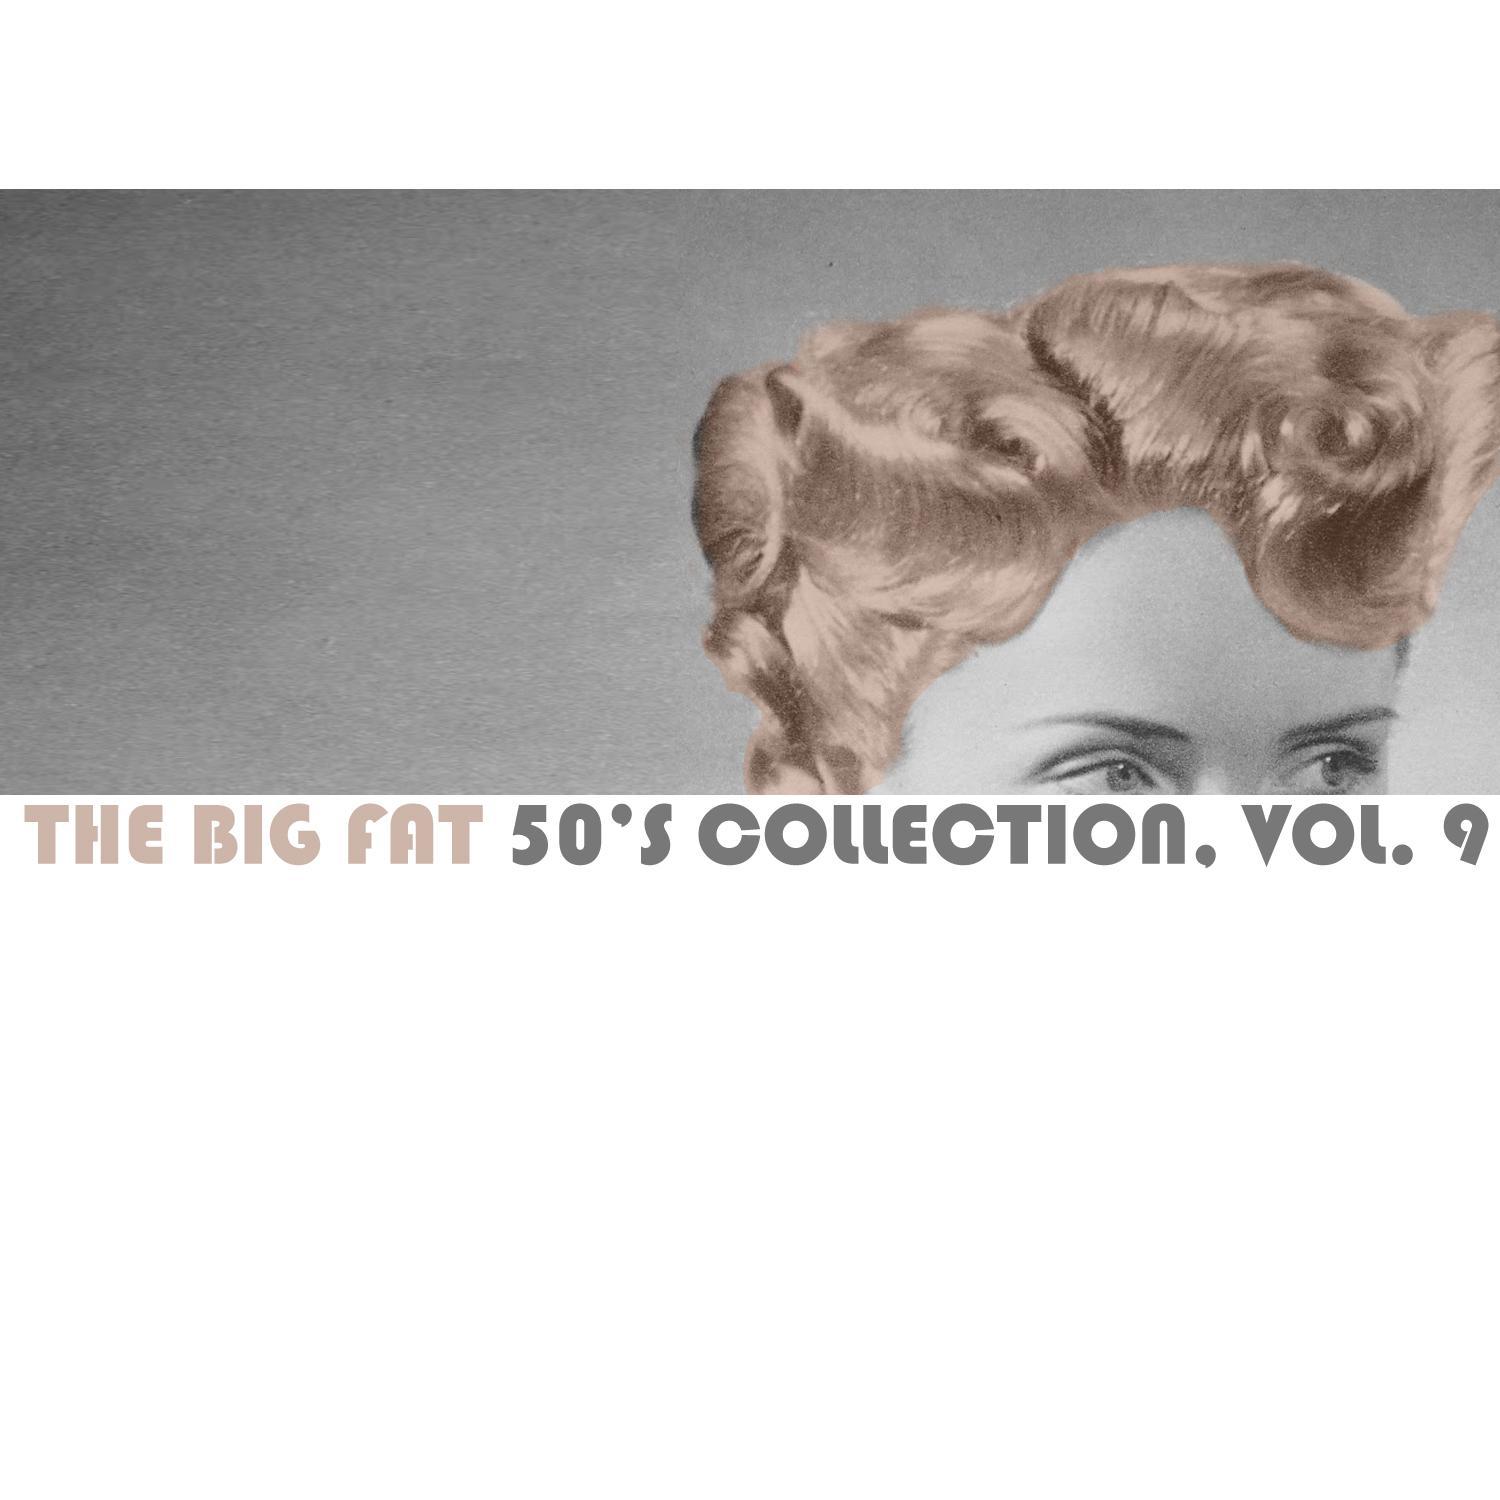 The Big Fat 50's Collection, Vol. 9